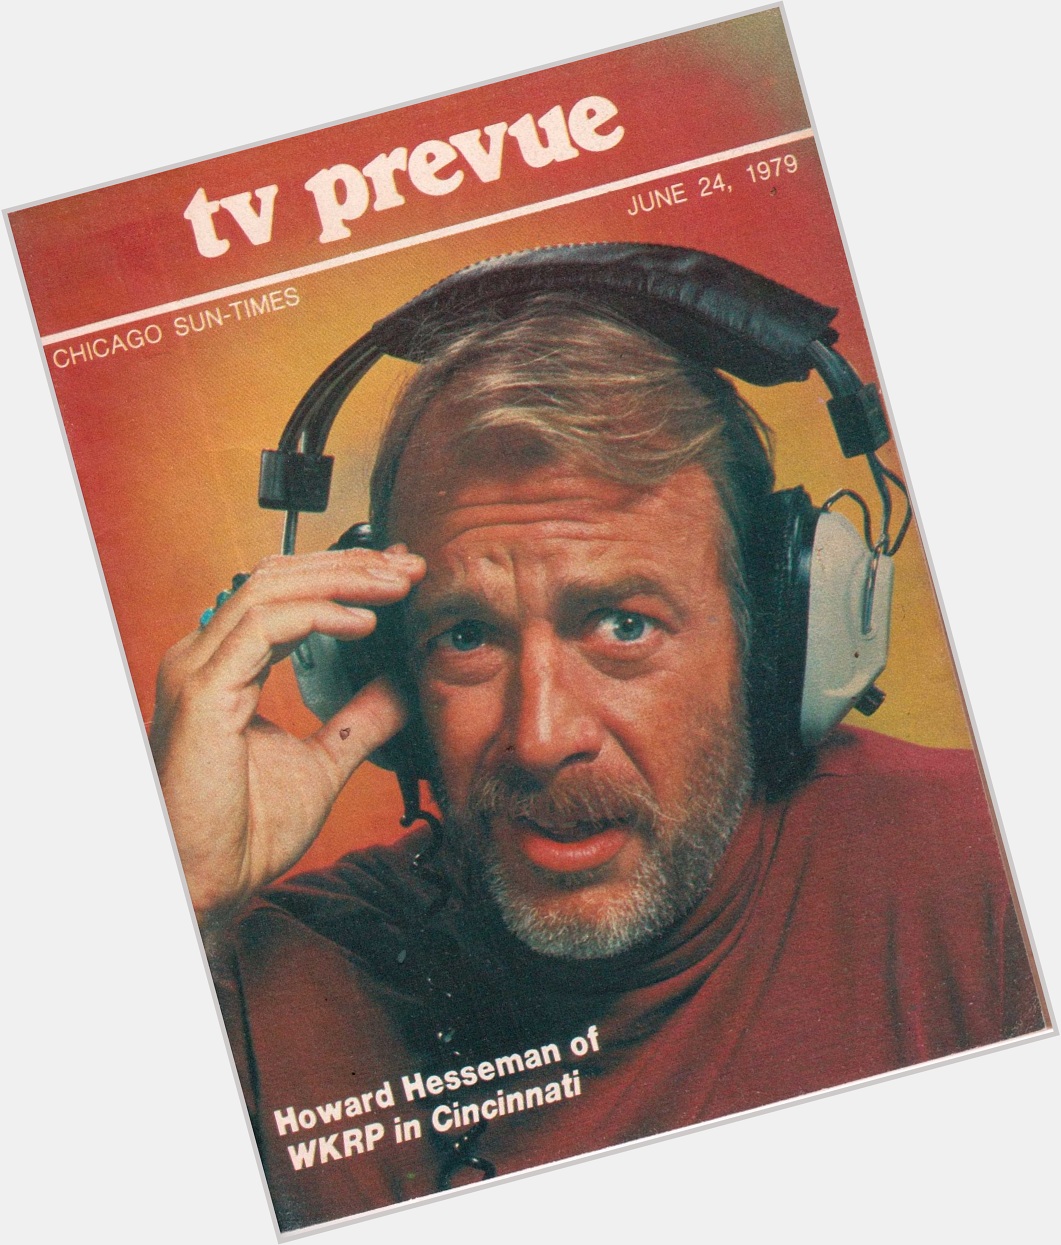 Happy Birthday to Howard Hesseman, born on this day in 1940 
Chicago Sun-Times TV Prevue.  June 24-30, 1979 